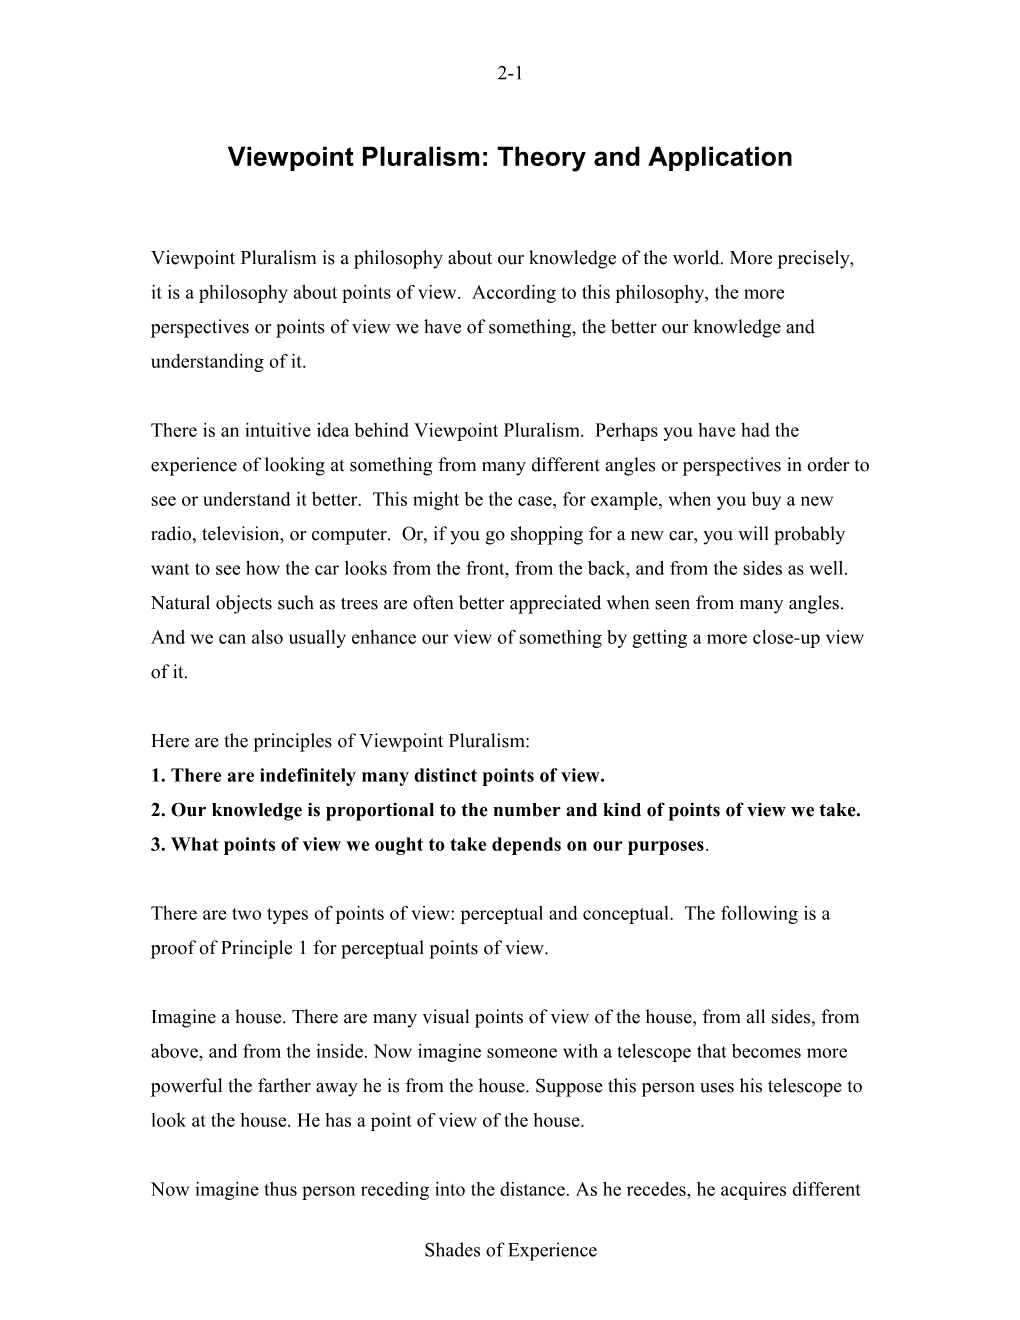 Viewpoint Pluralism: Theory and Application